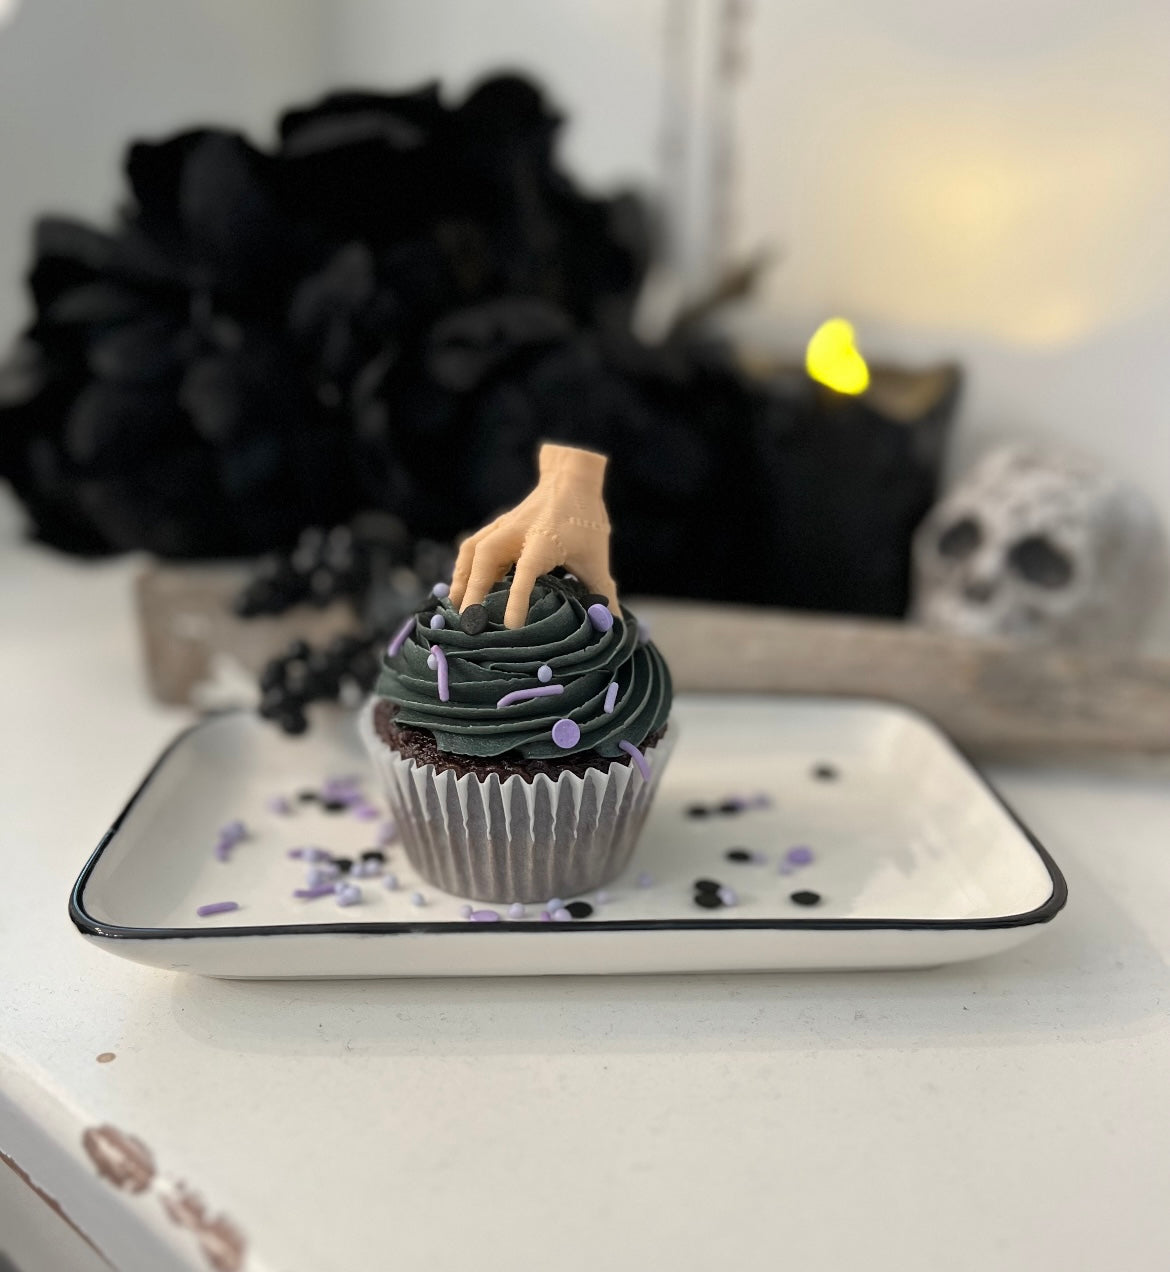 3D Printed Thing Hand Cake Topper - Gadgets And Threads